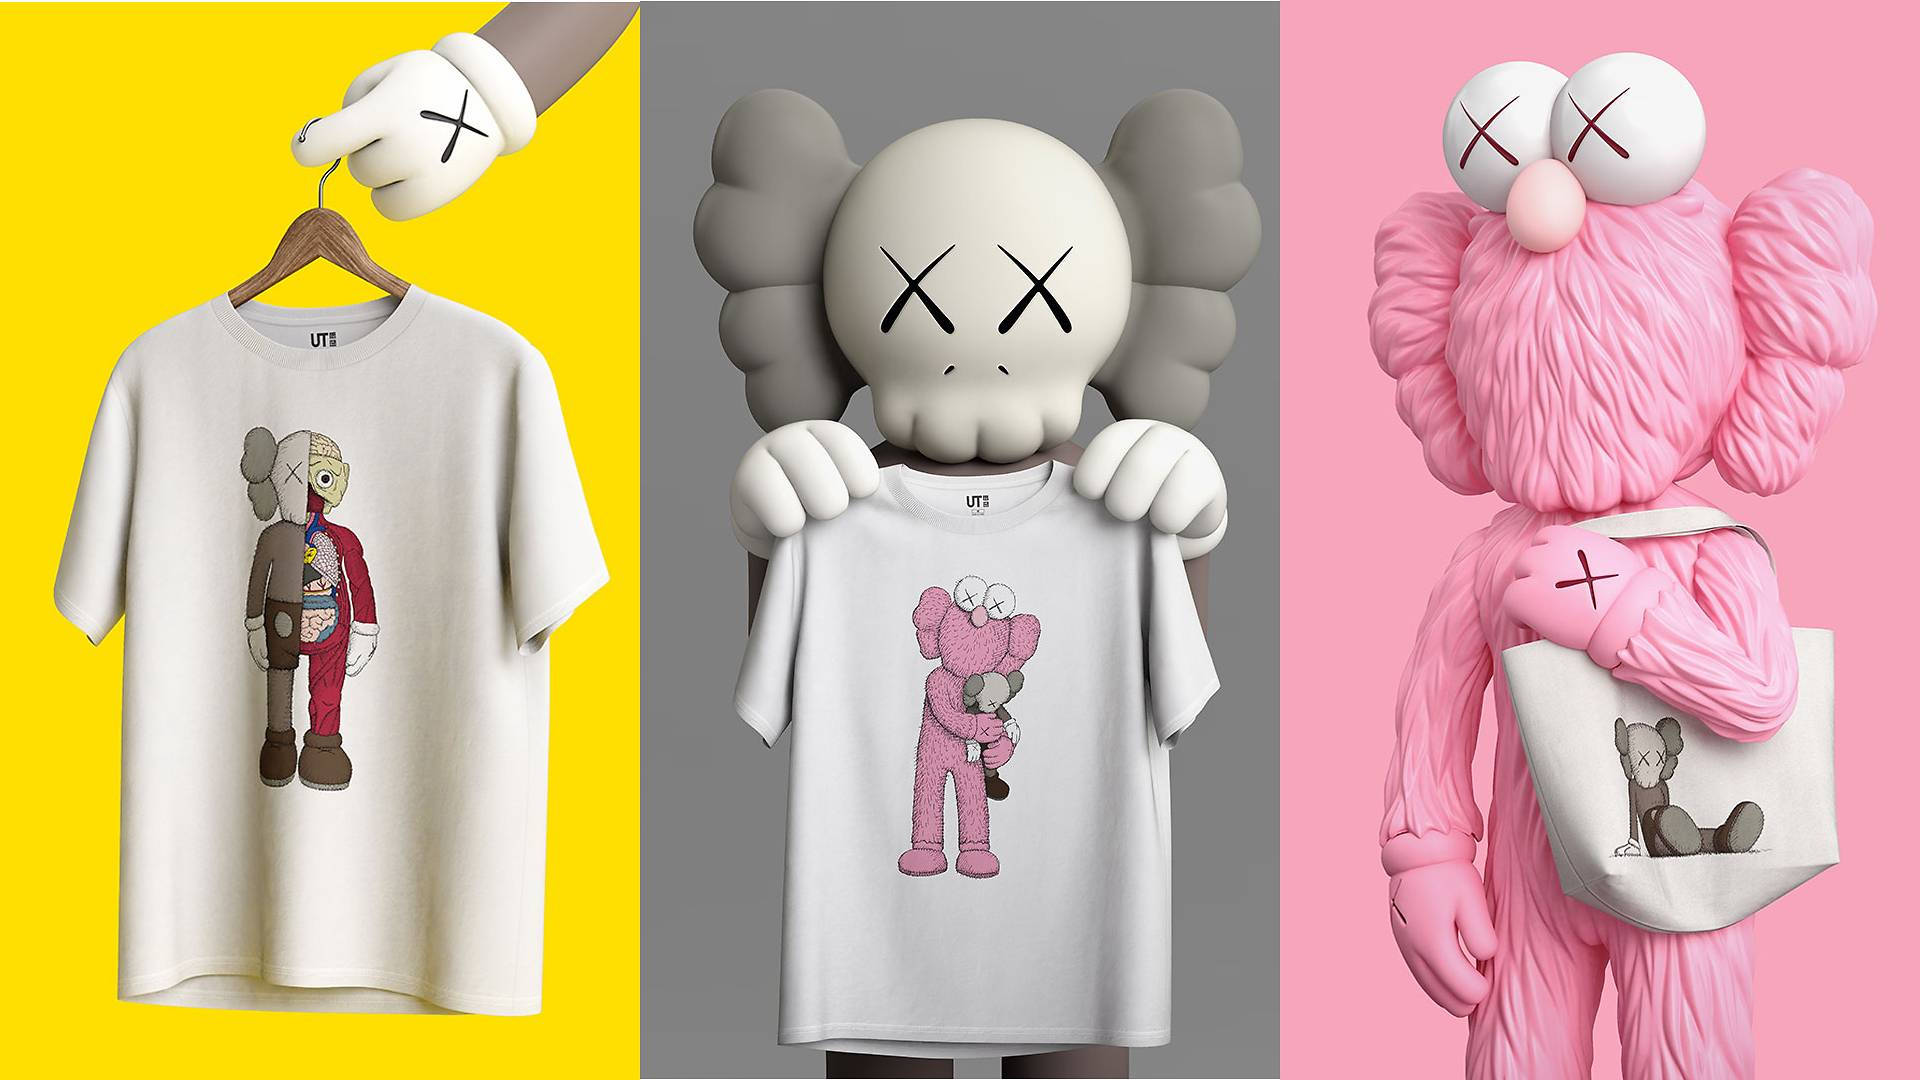 4K Kaws Wallpaper Explore more American Artist Brian Donnelly  Characters Kaws Professionall  Kaws wallpaper Kaws iphone wallpaper  Graffiti wallpaper iphone